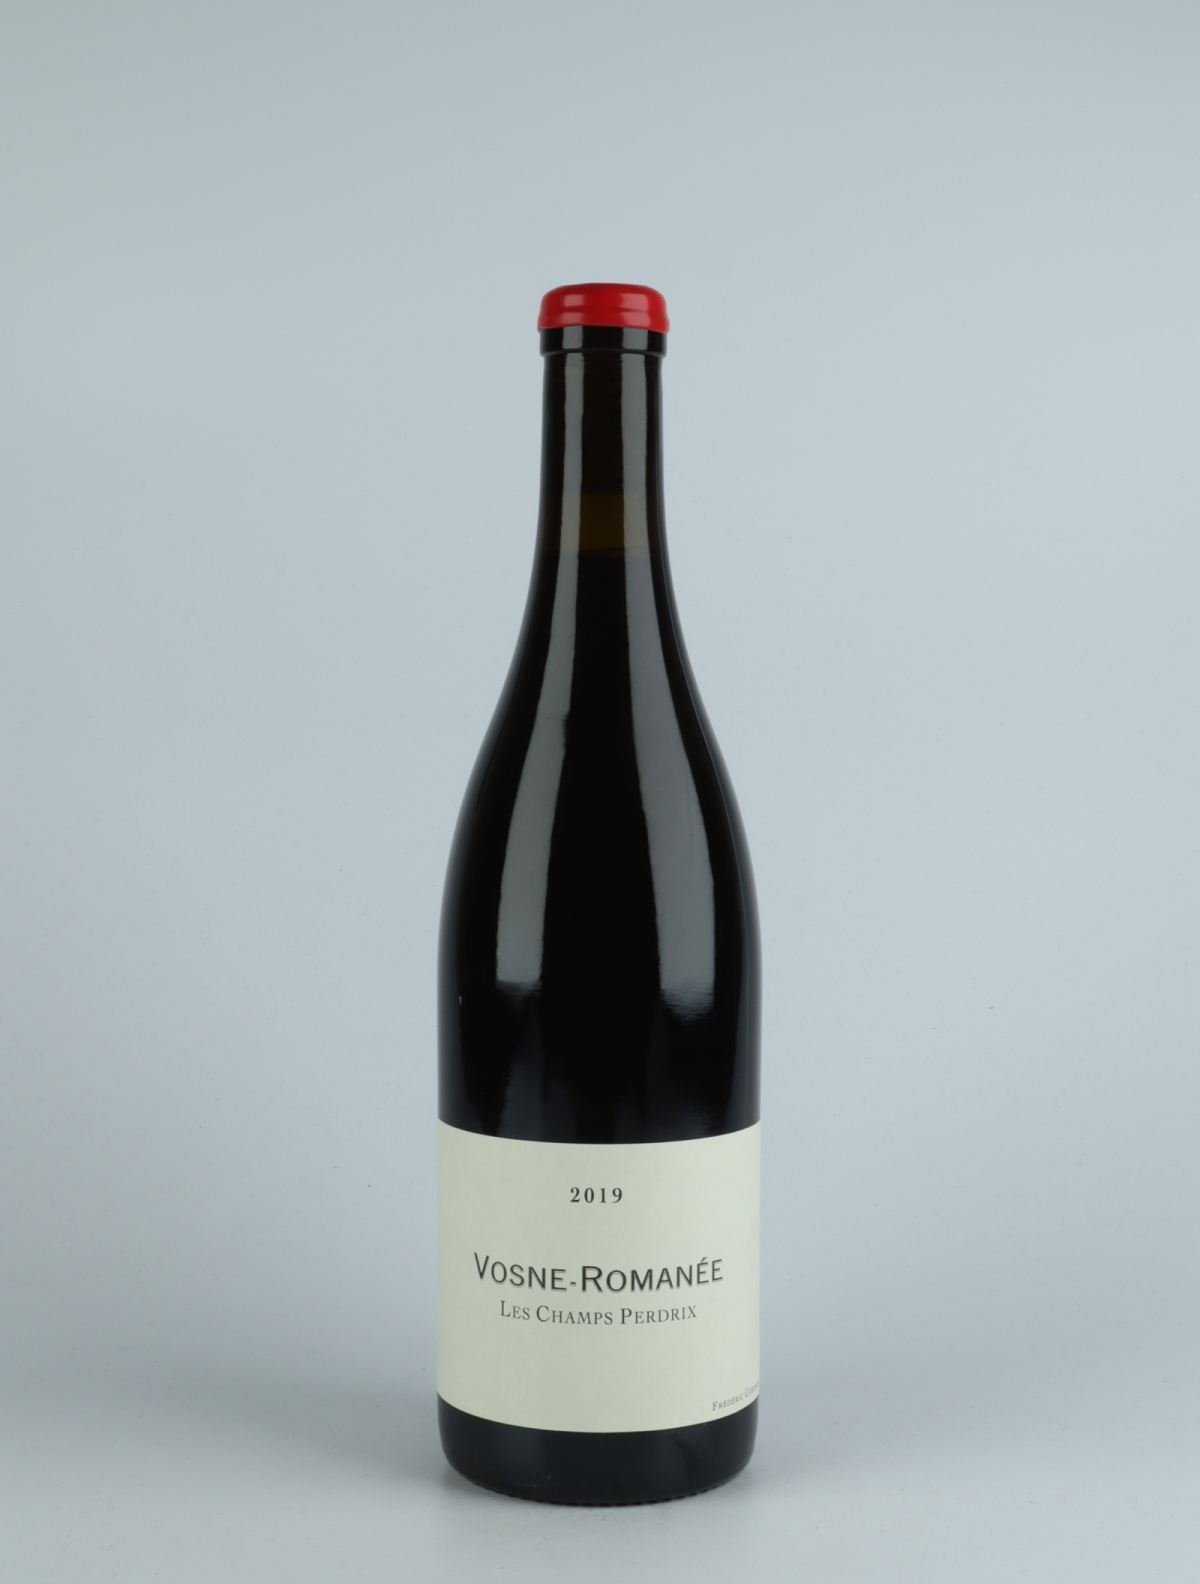 A bottle 2019 Vosne Romanée - Les Champs Perdrix Red wine from Frédéric Cossard, Burgundy in France